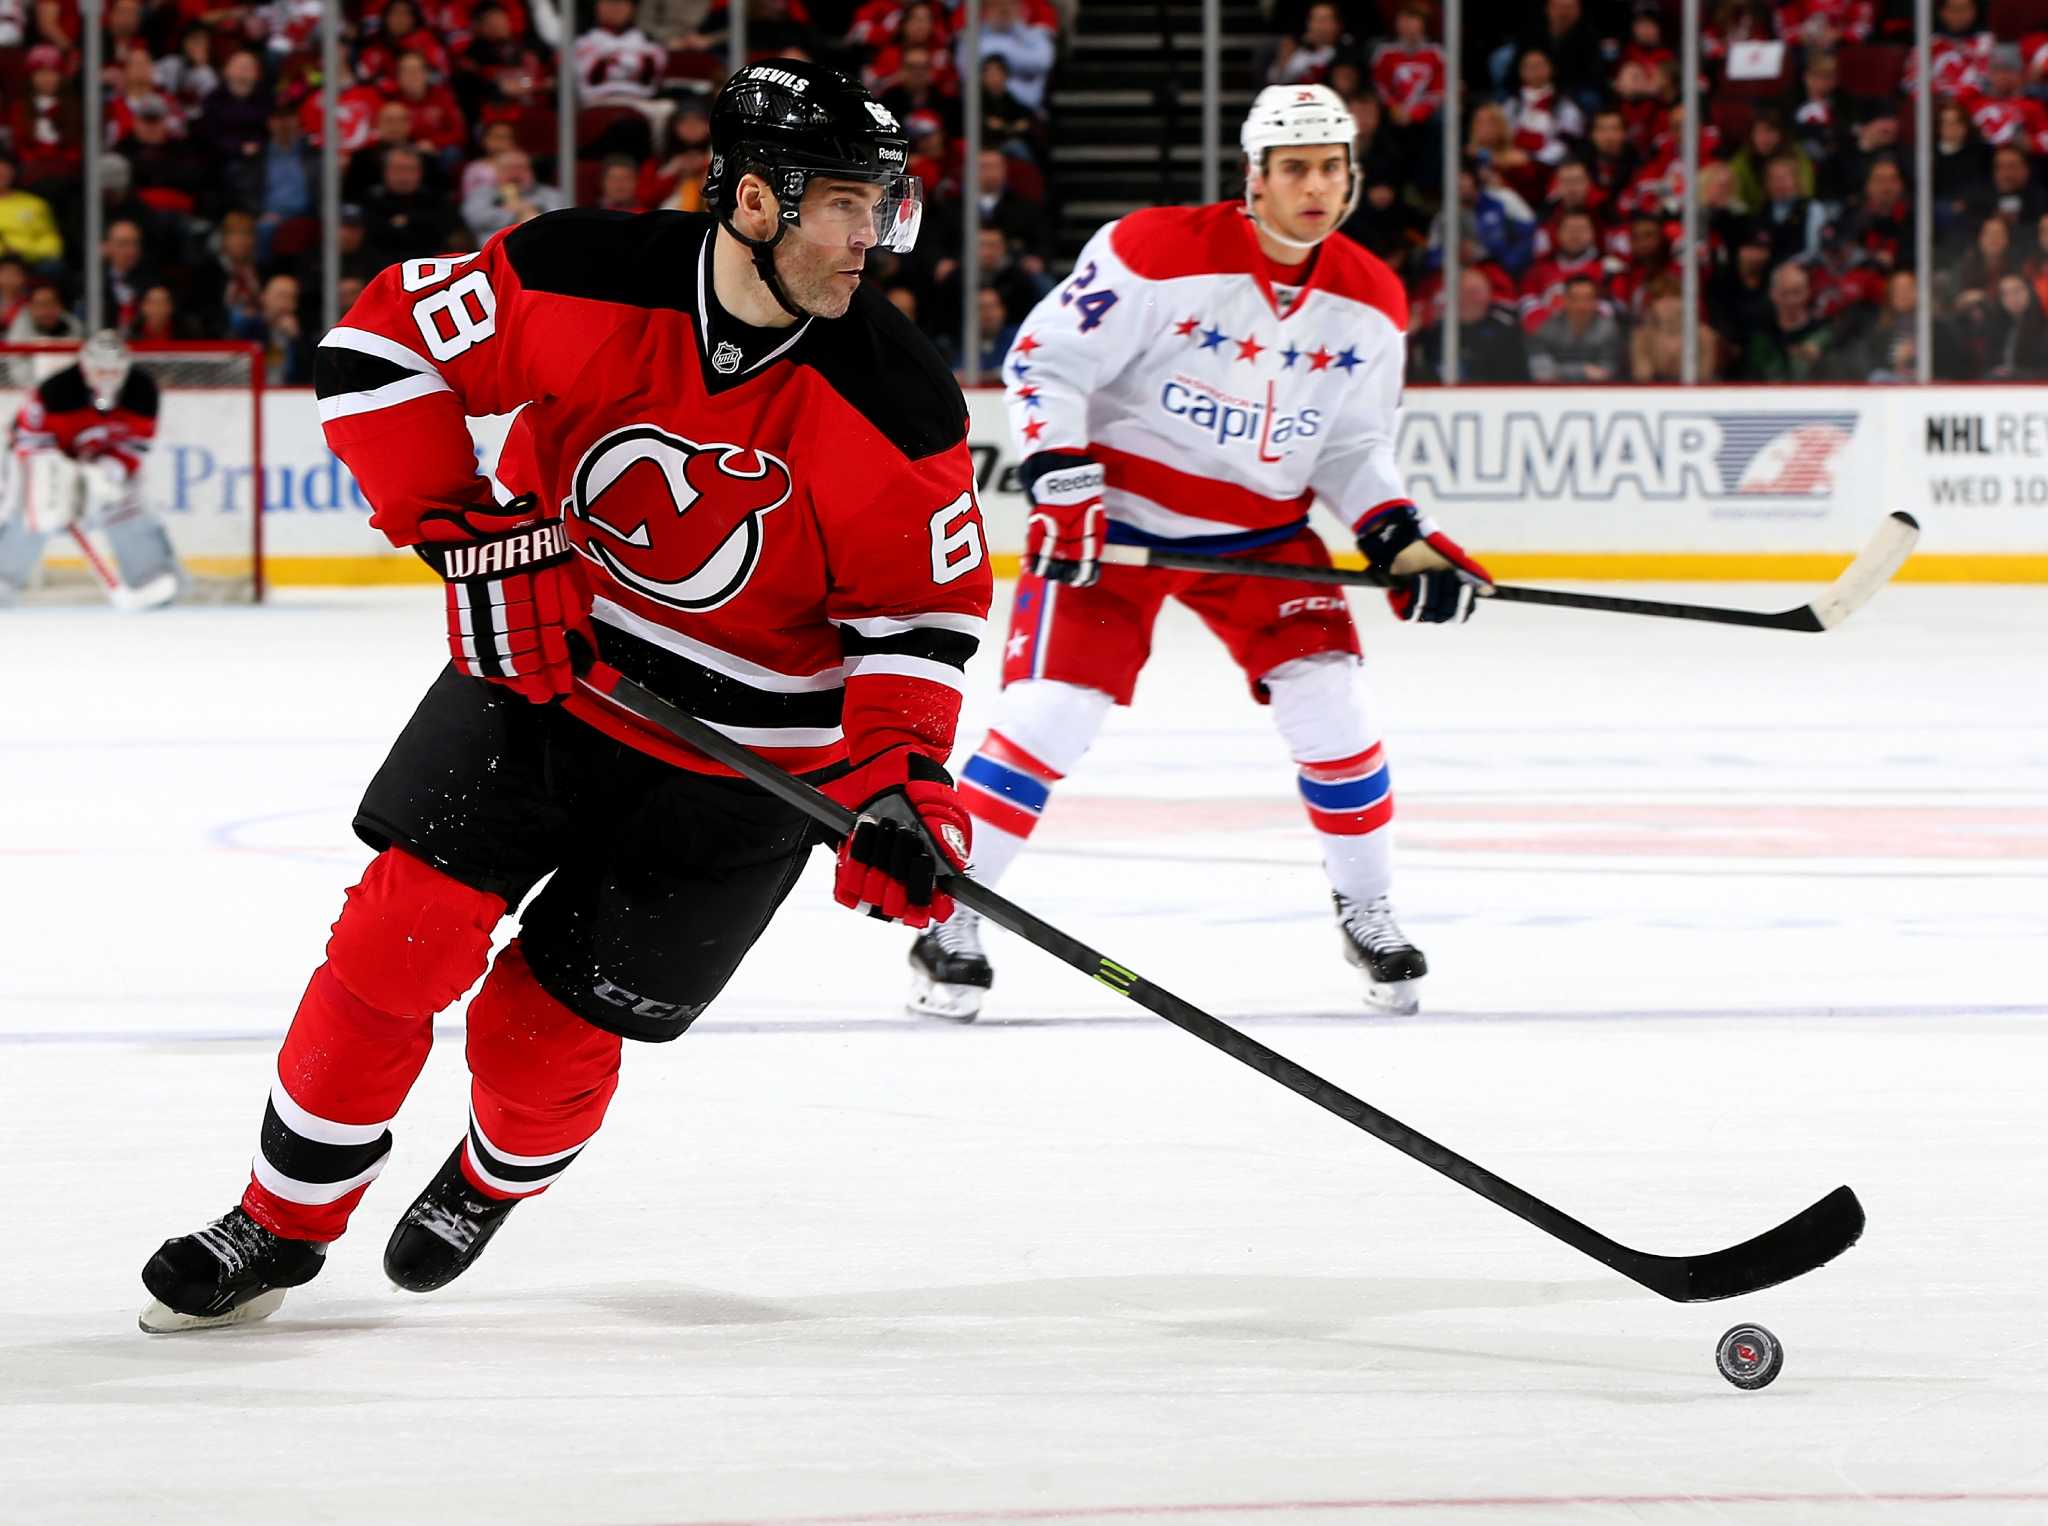 Jagr ties for 10th in all-time assists, Devils win